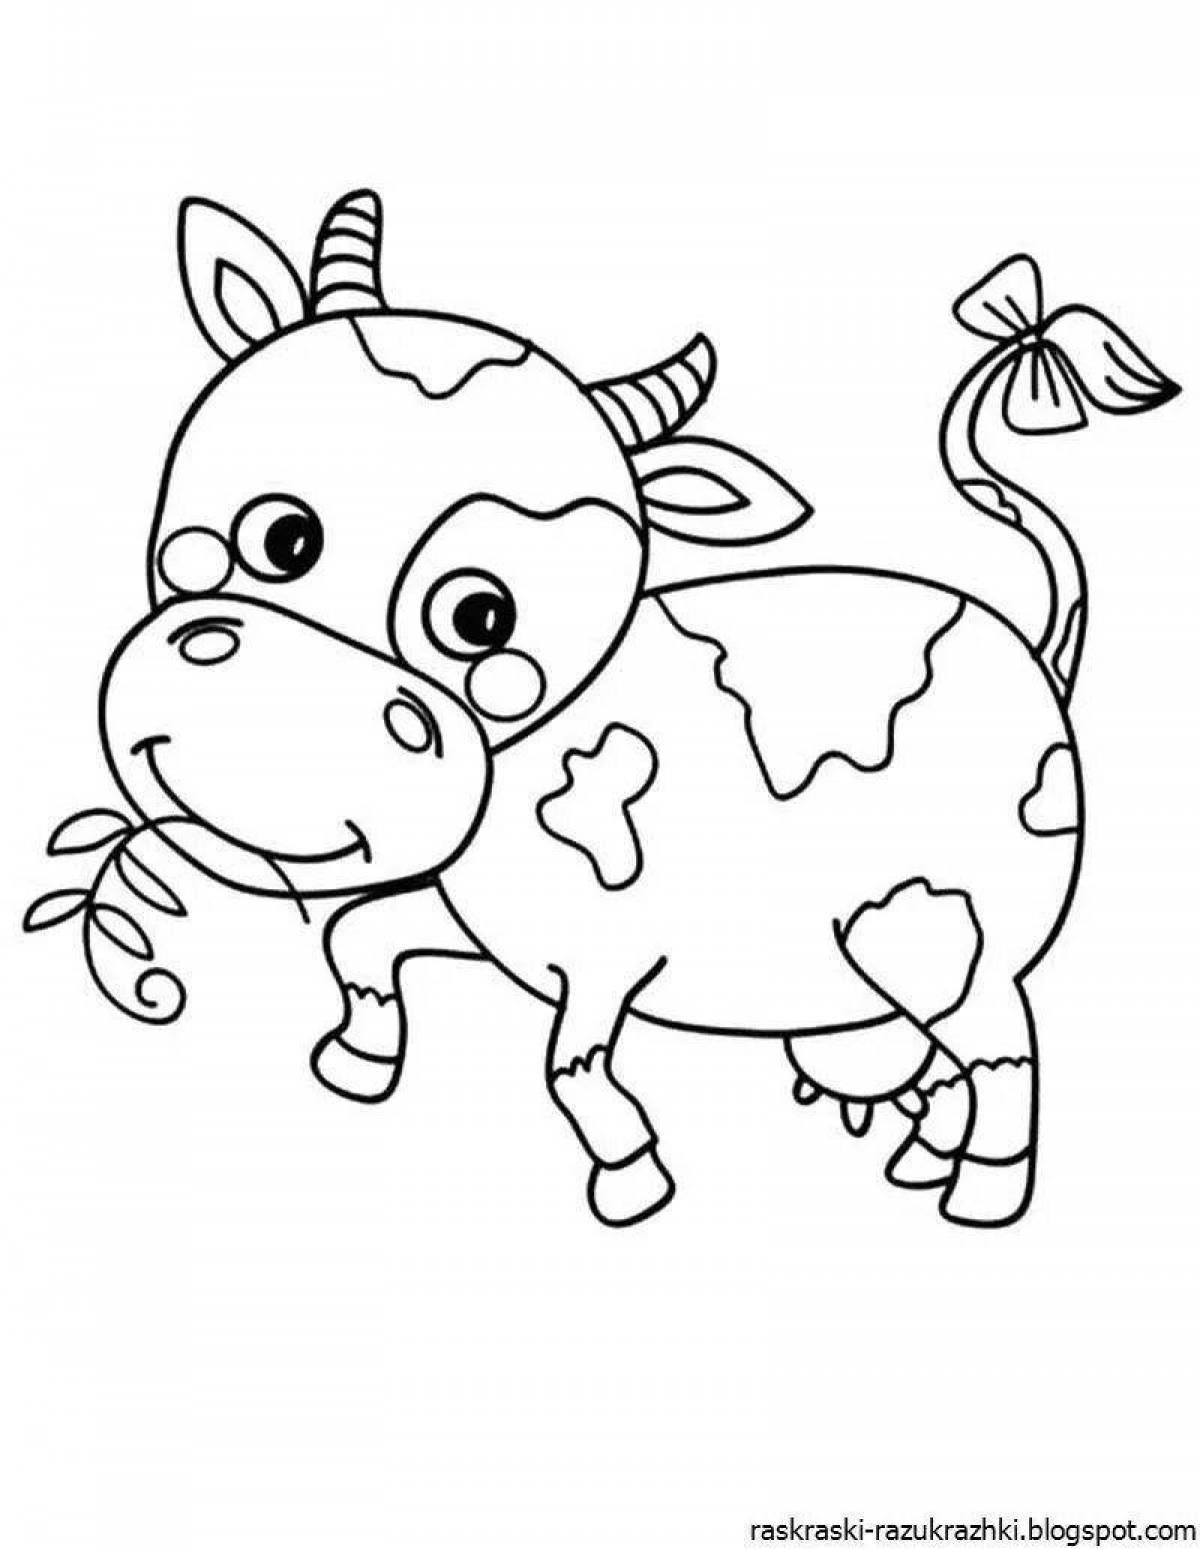 Funny cow coloring book for 4-5 year olds